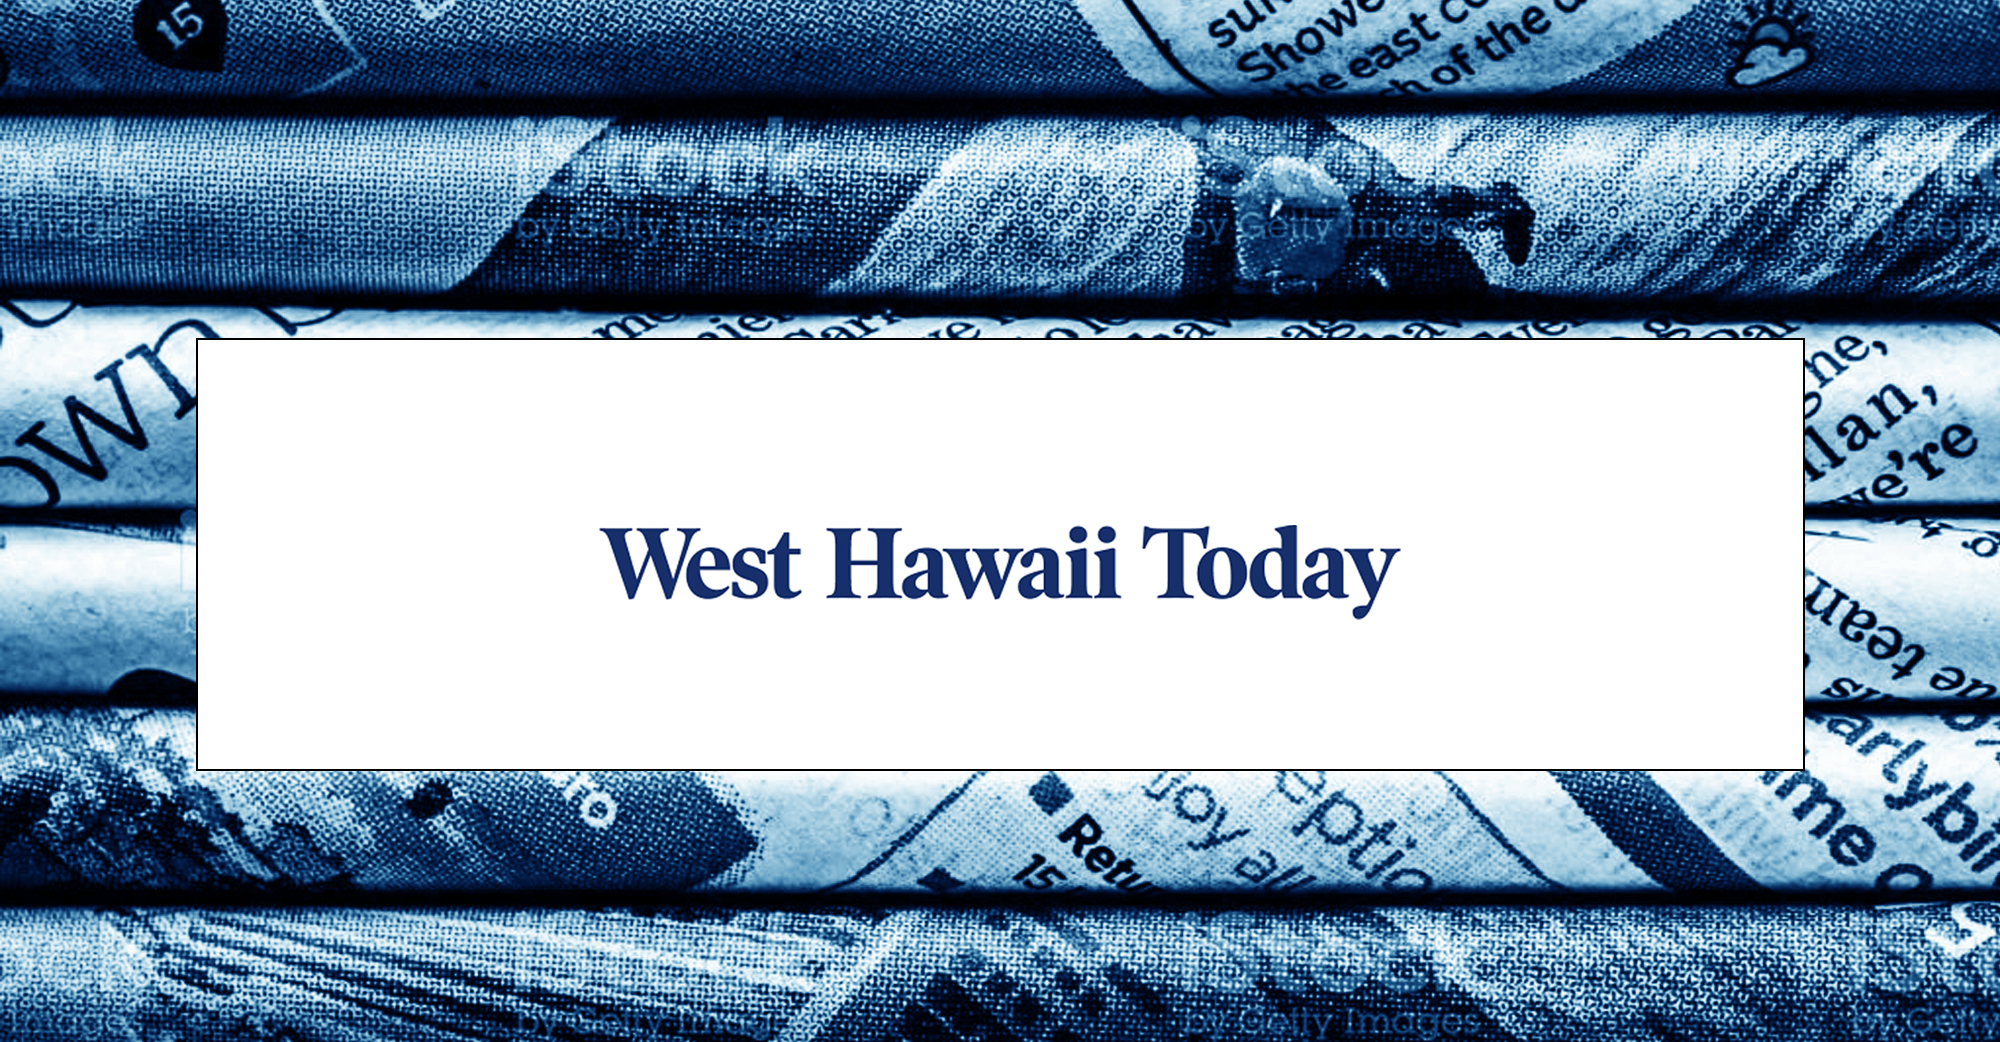 Increased access to Waipio Valley starts Monday– West Hawaii Today 9/16/22